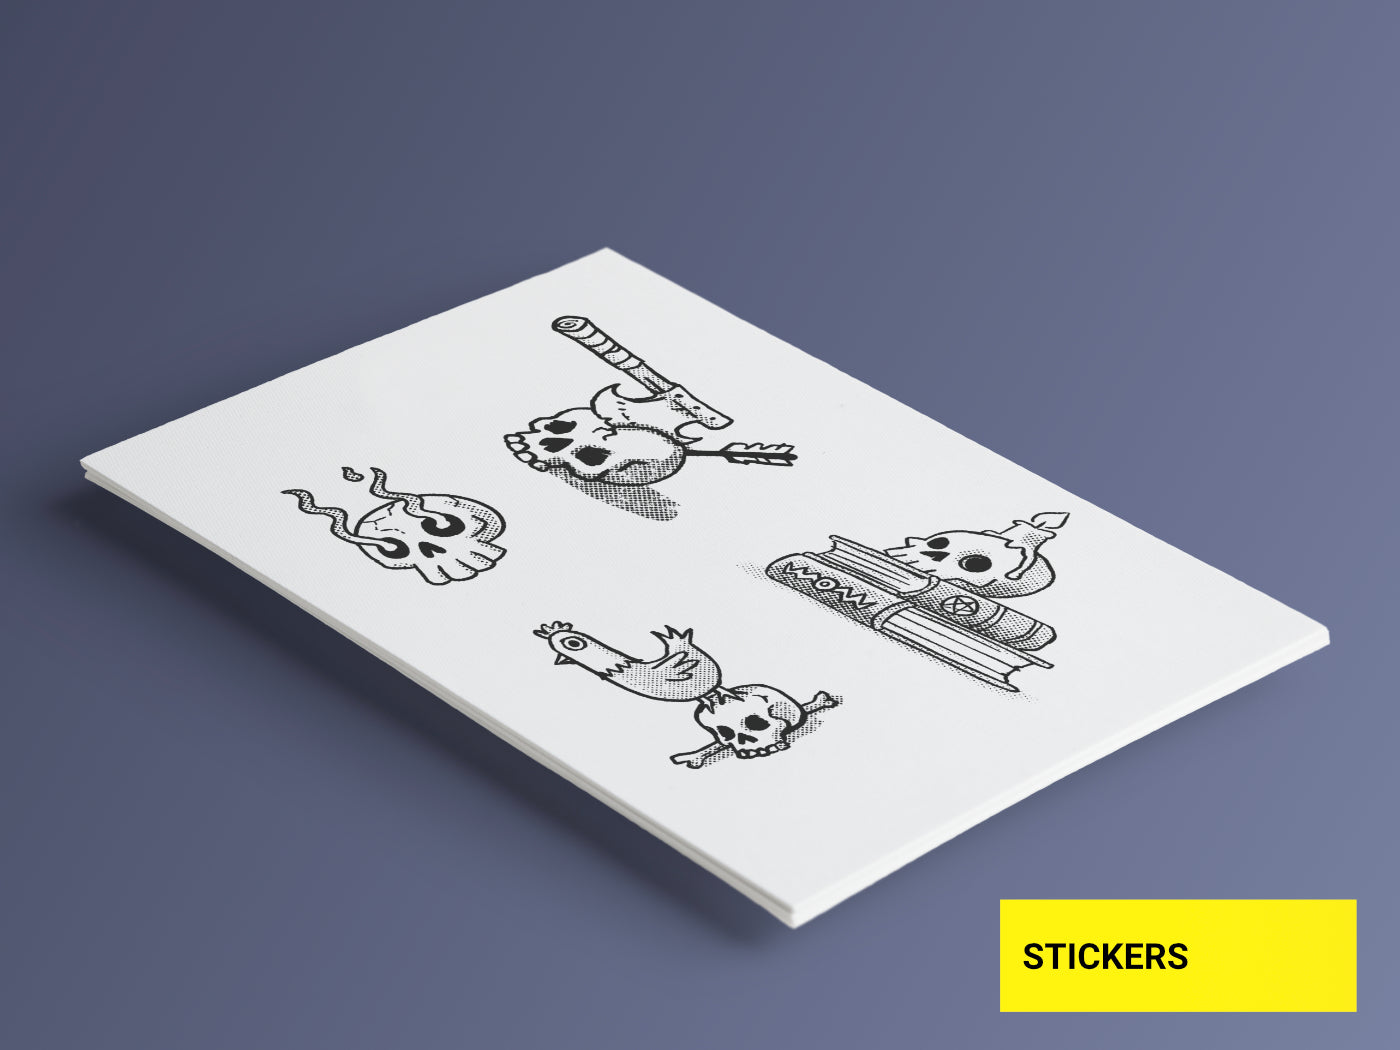 Exclusive skull stickers by Emiel Boven